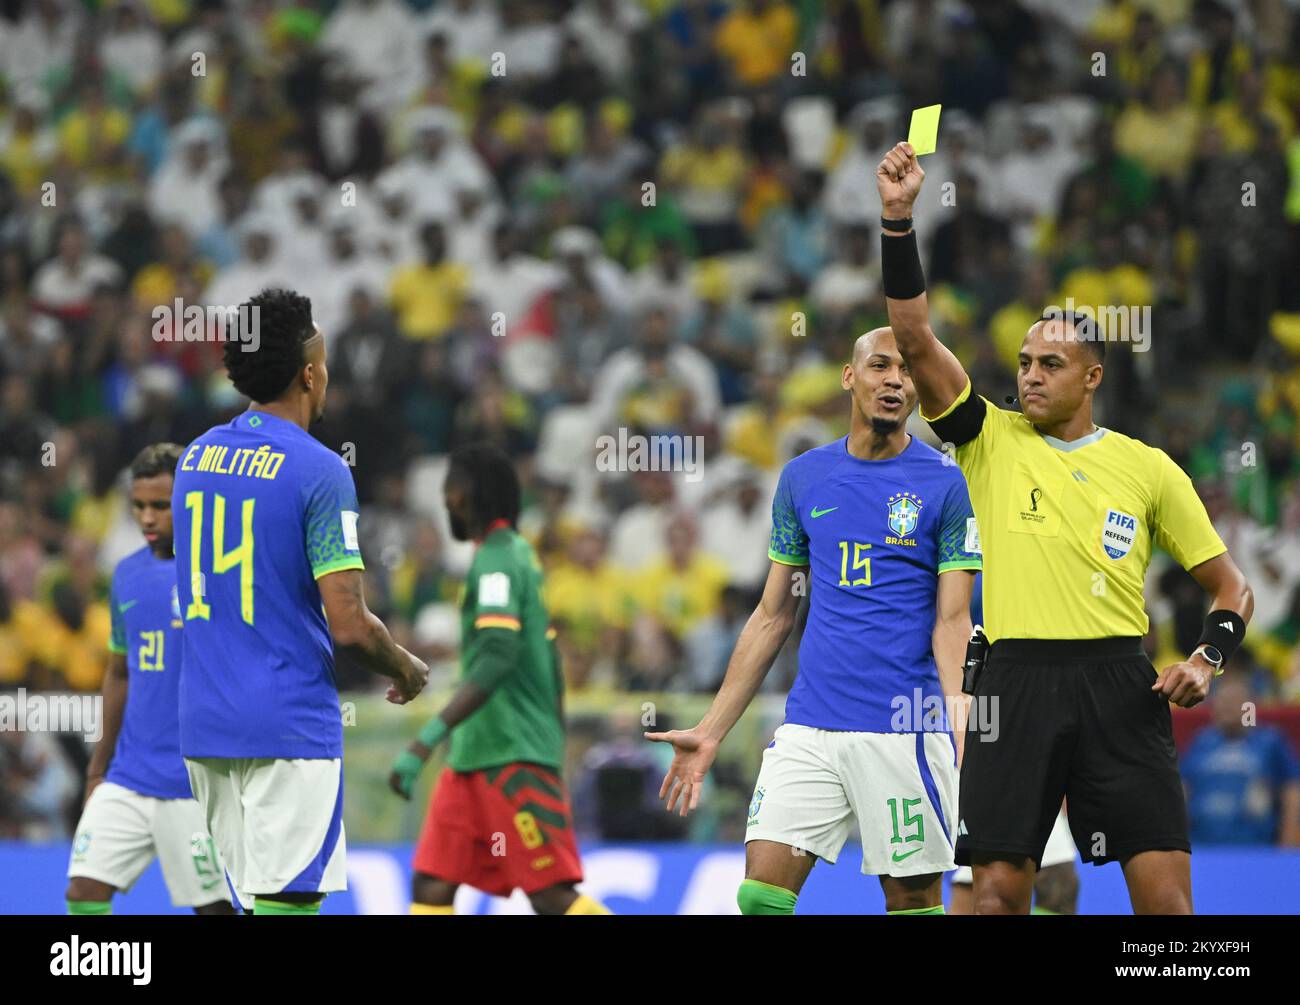 Lusail, Qatar. 2nd Dec, 2022. Referee Ismail Elfath (R) gives a yellow card to Eder Militao of Brazil during the Group G match between Cameroon and Brazil at the 2022 FIFA World Cup at Lusail Stadium in Lusail, Qatar, Dec. 2, 2022. Credit: Li Ga/Xinhua/Alamy Live News Stock Photo